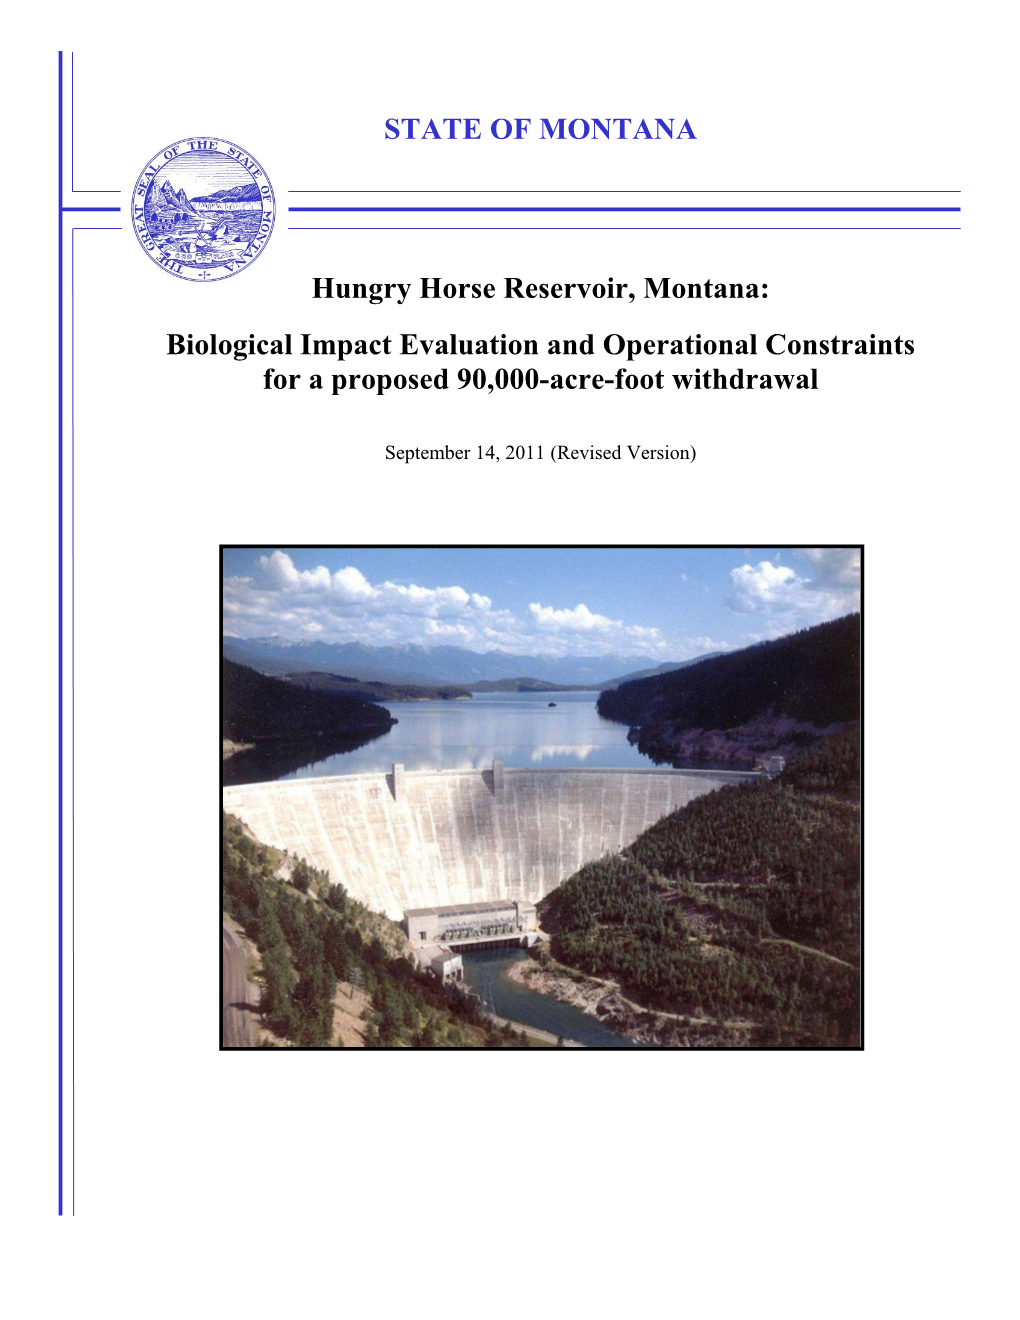 Hungry Horse Reservoir, Montana: Biological Impact Evaluation and Operational Constraints for a Proposed 90,000-Acre-Foot Withdrawal